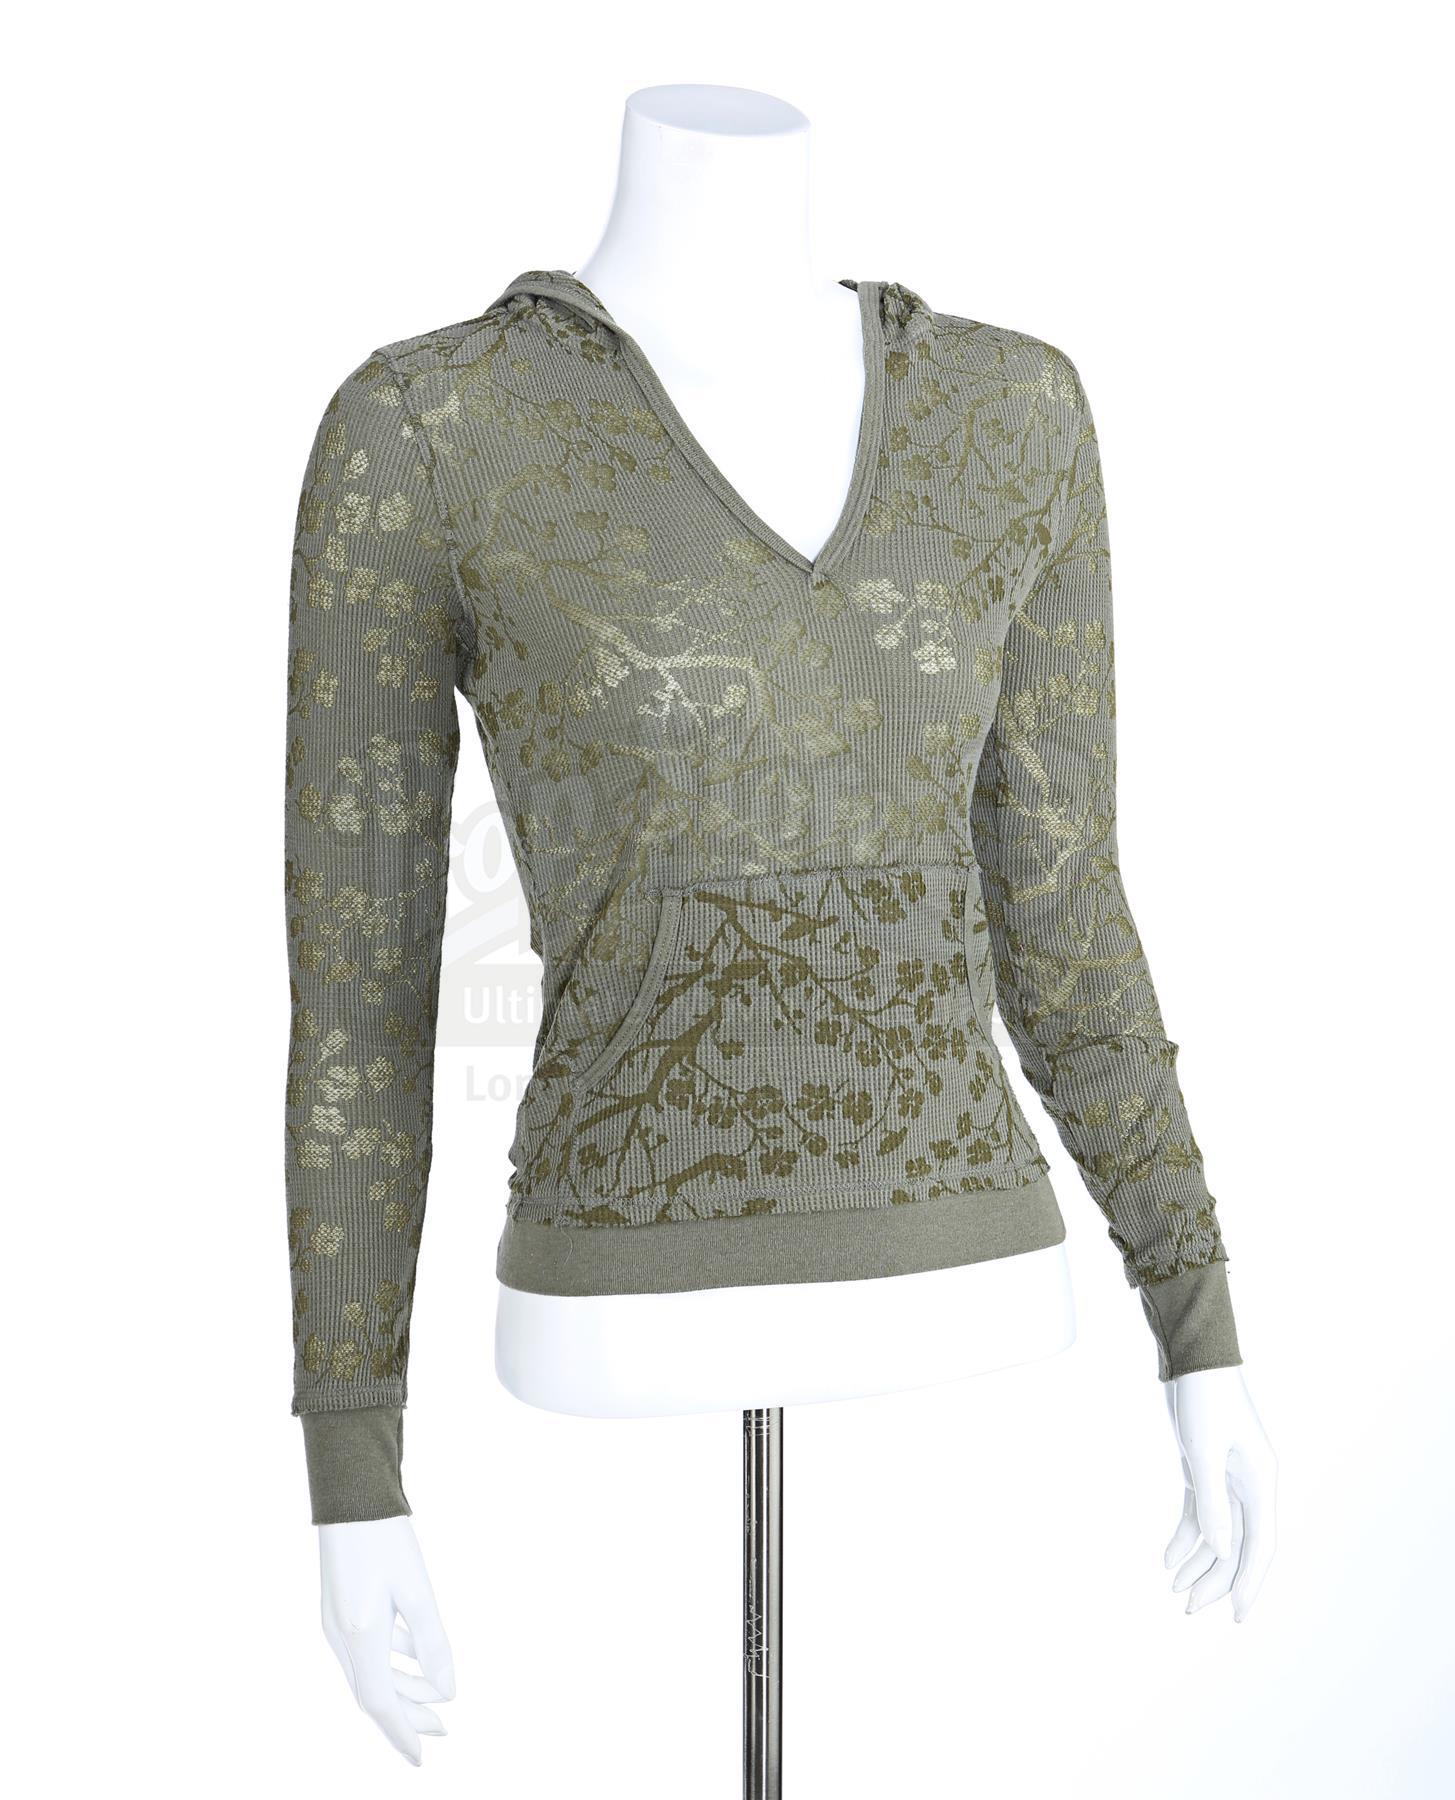 TWILIGHT (2008) - Bella Swan's Green Hooded Thermal - Current price: $900